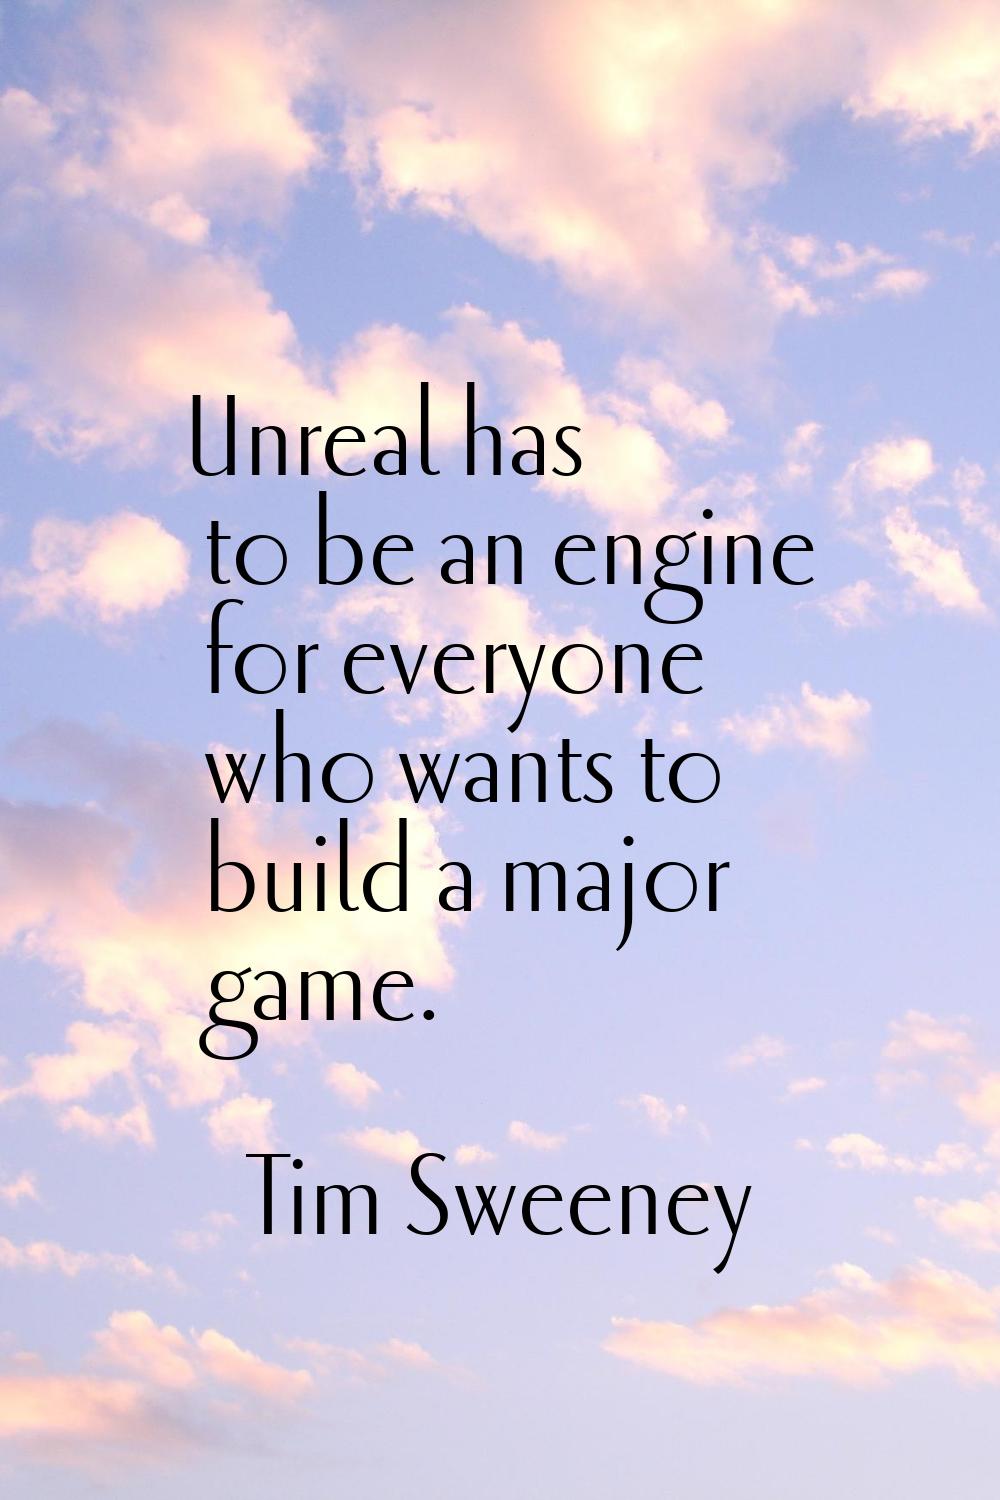 Unreal has to be an engine for everyone who wants to build a major game.